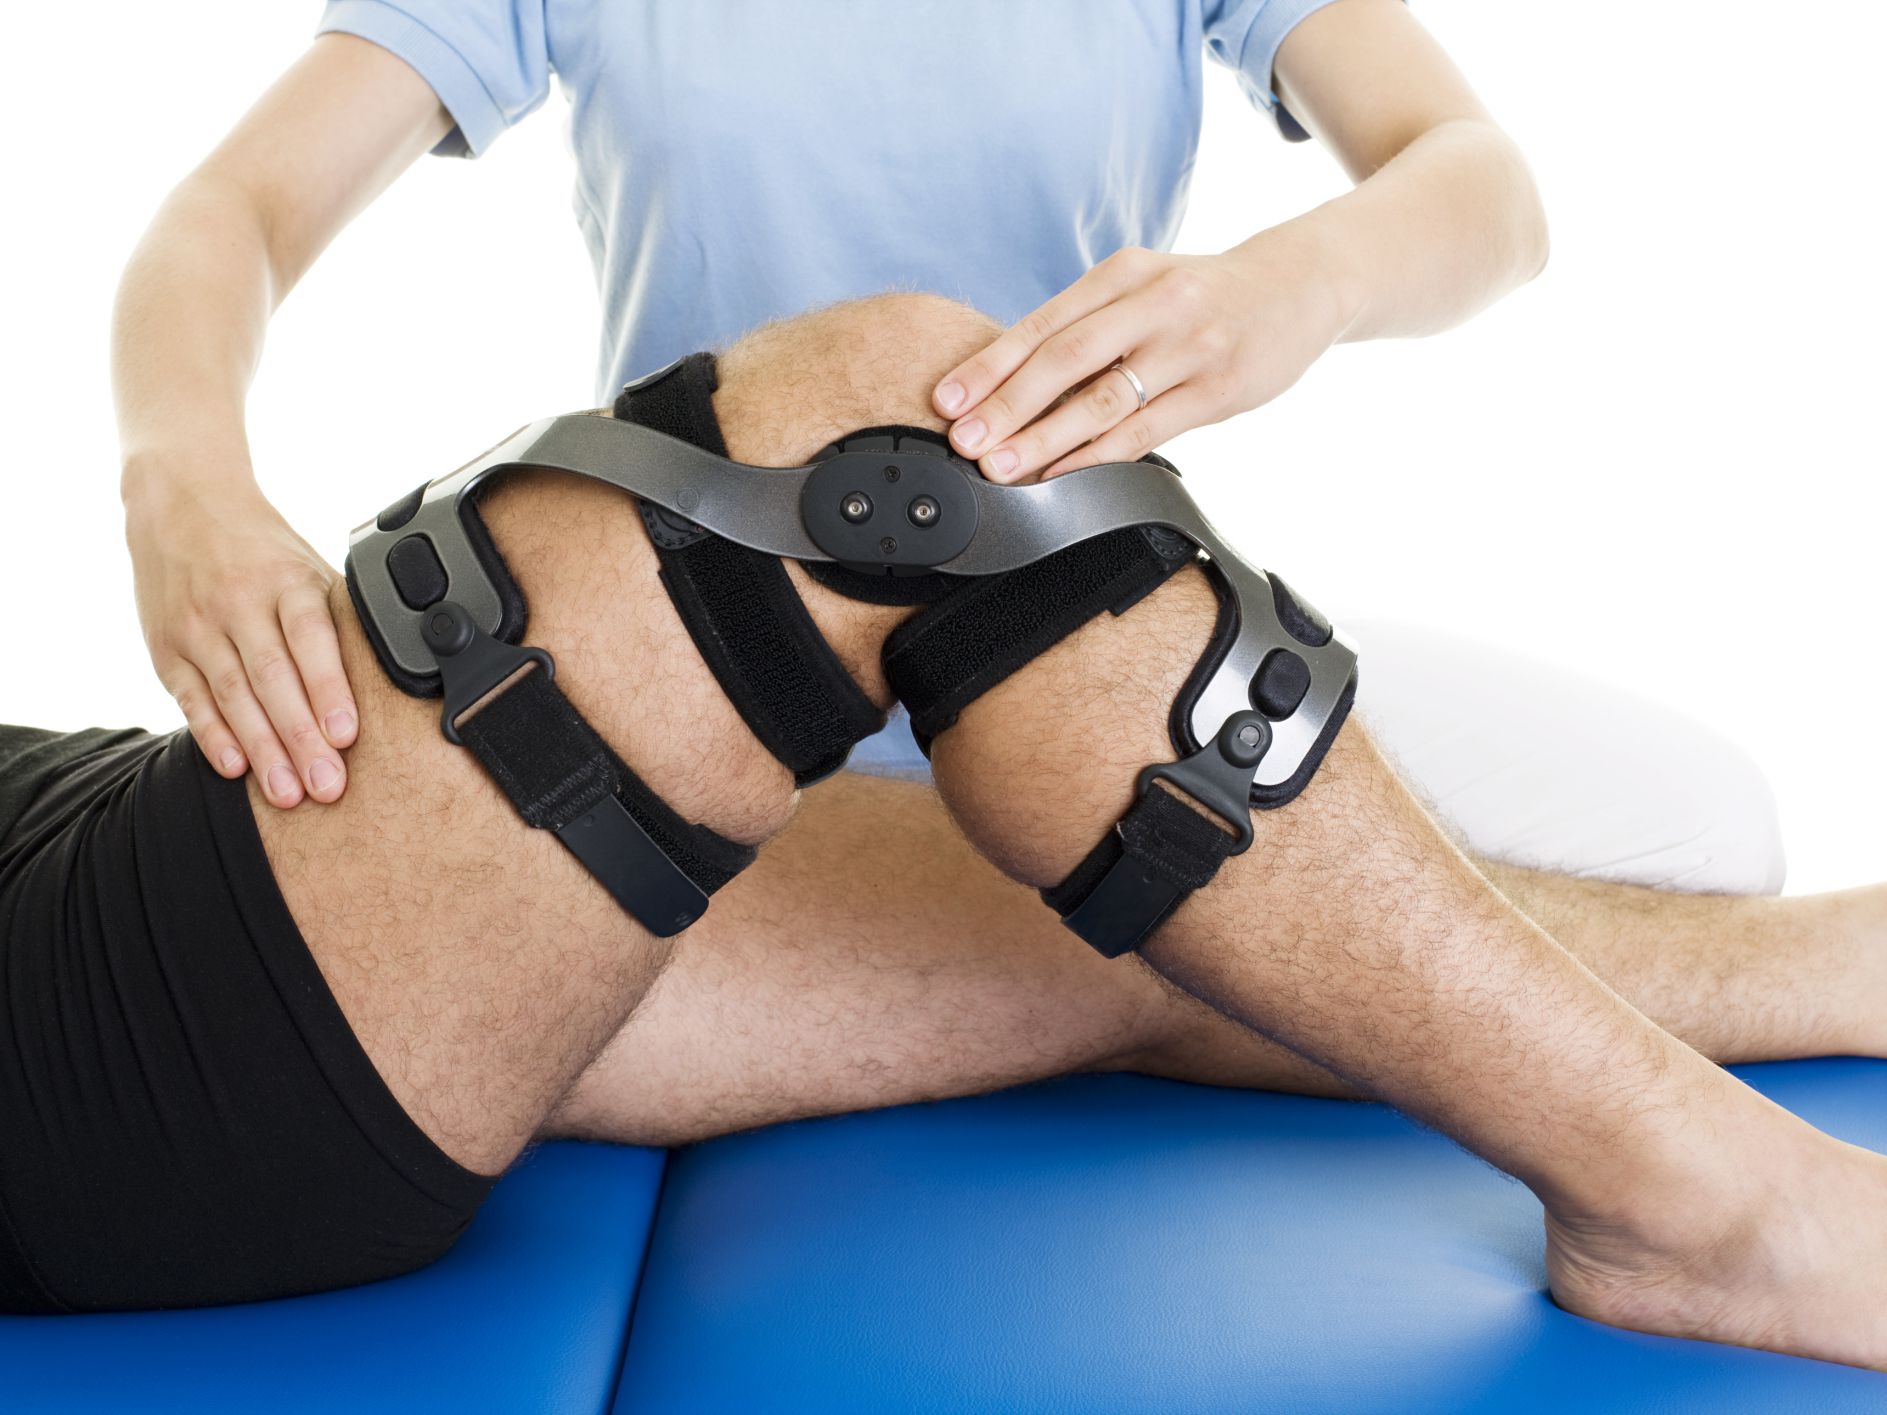 Why is there a need for ACL reconstruction surgery? 1